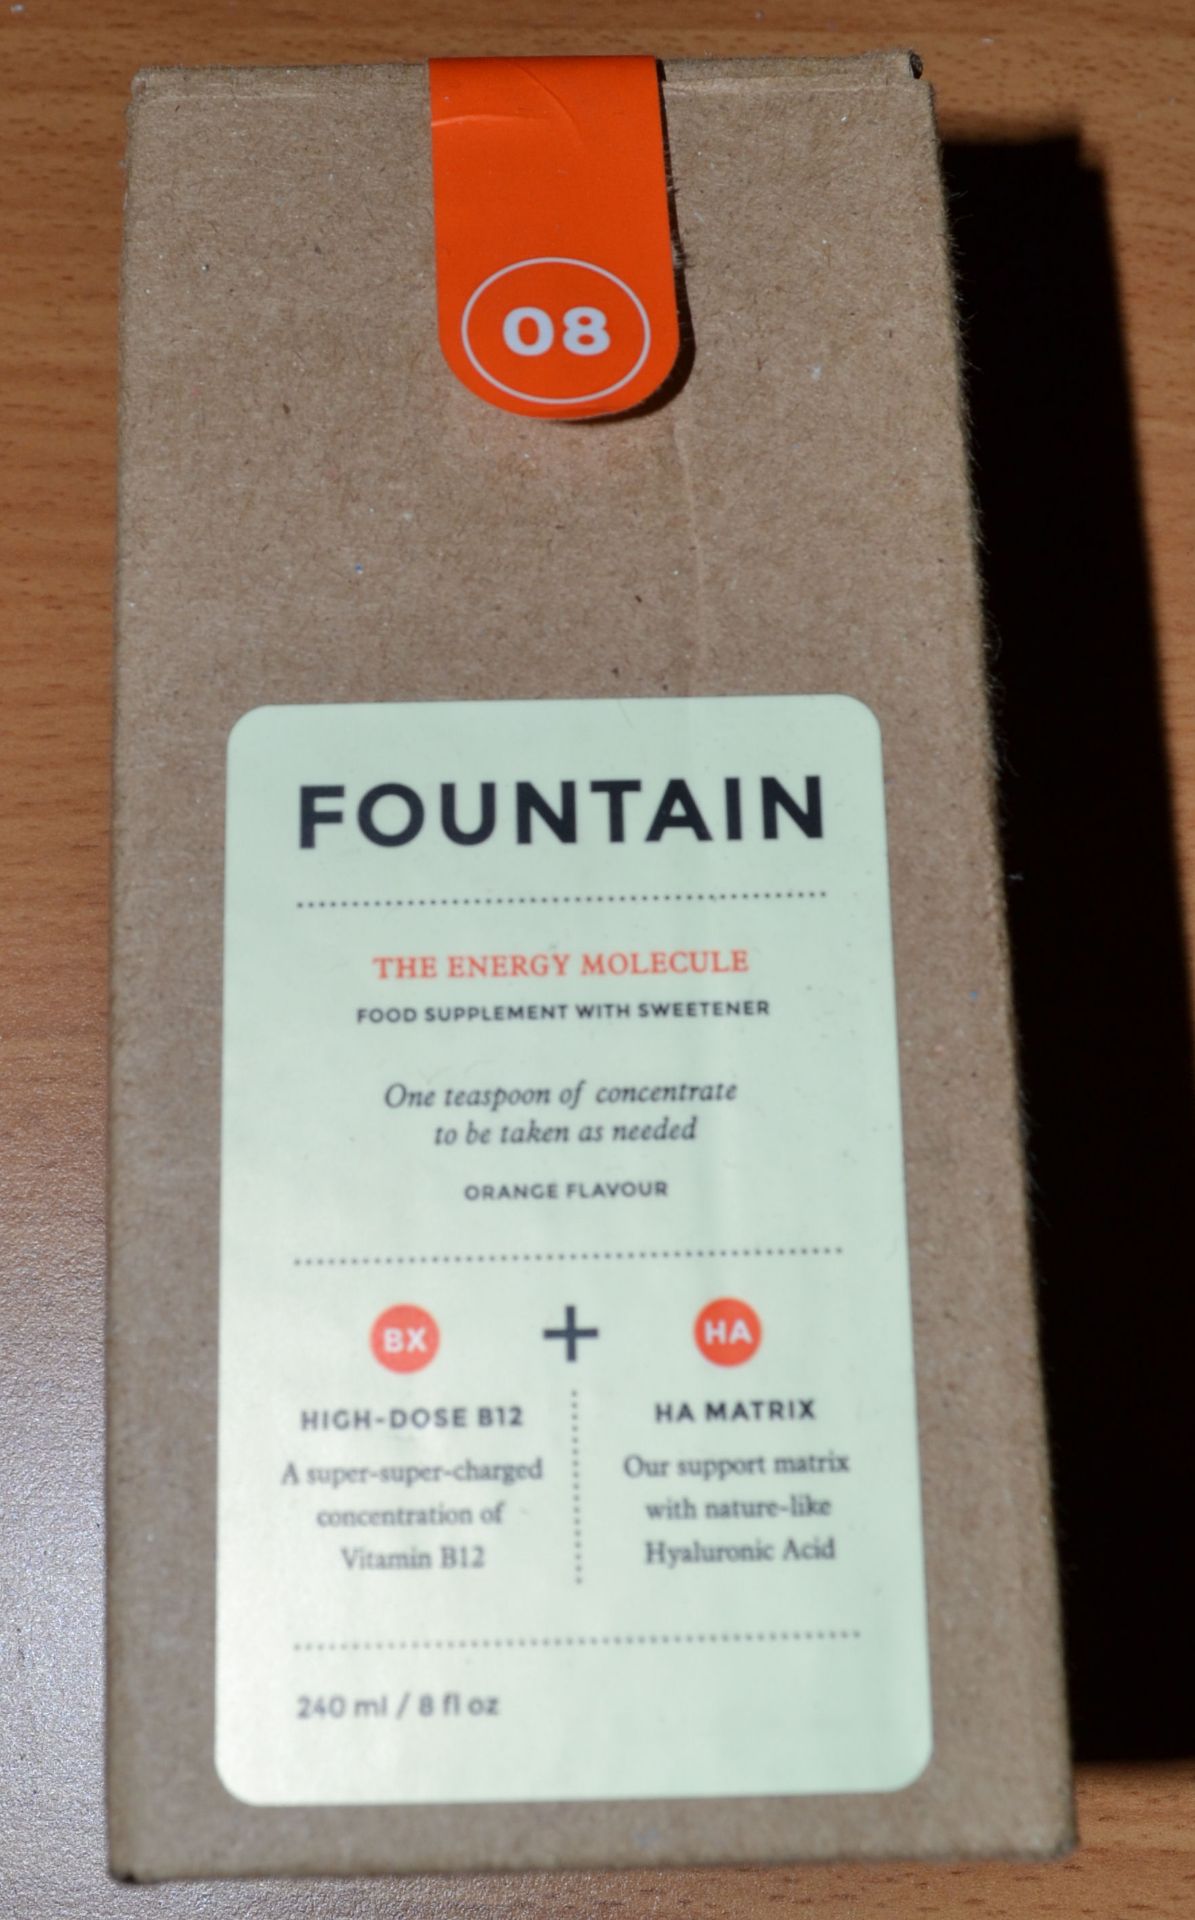 10 x 240ml Bottles of Fountain, The Energy Molecule Supplement - New & Boxed - CL185 - Ref: DRT0643 - Image 3 of 7